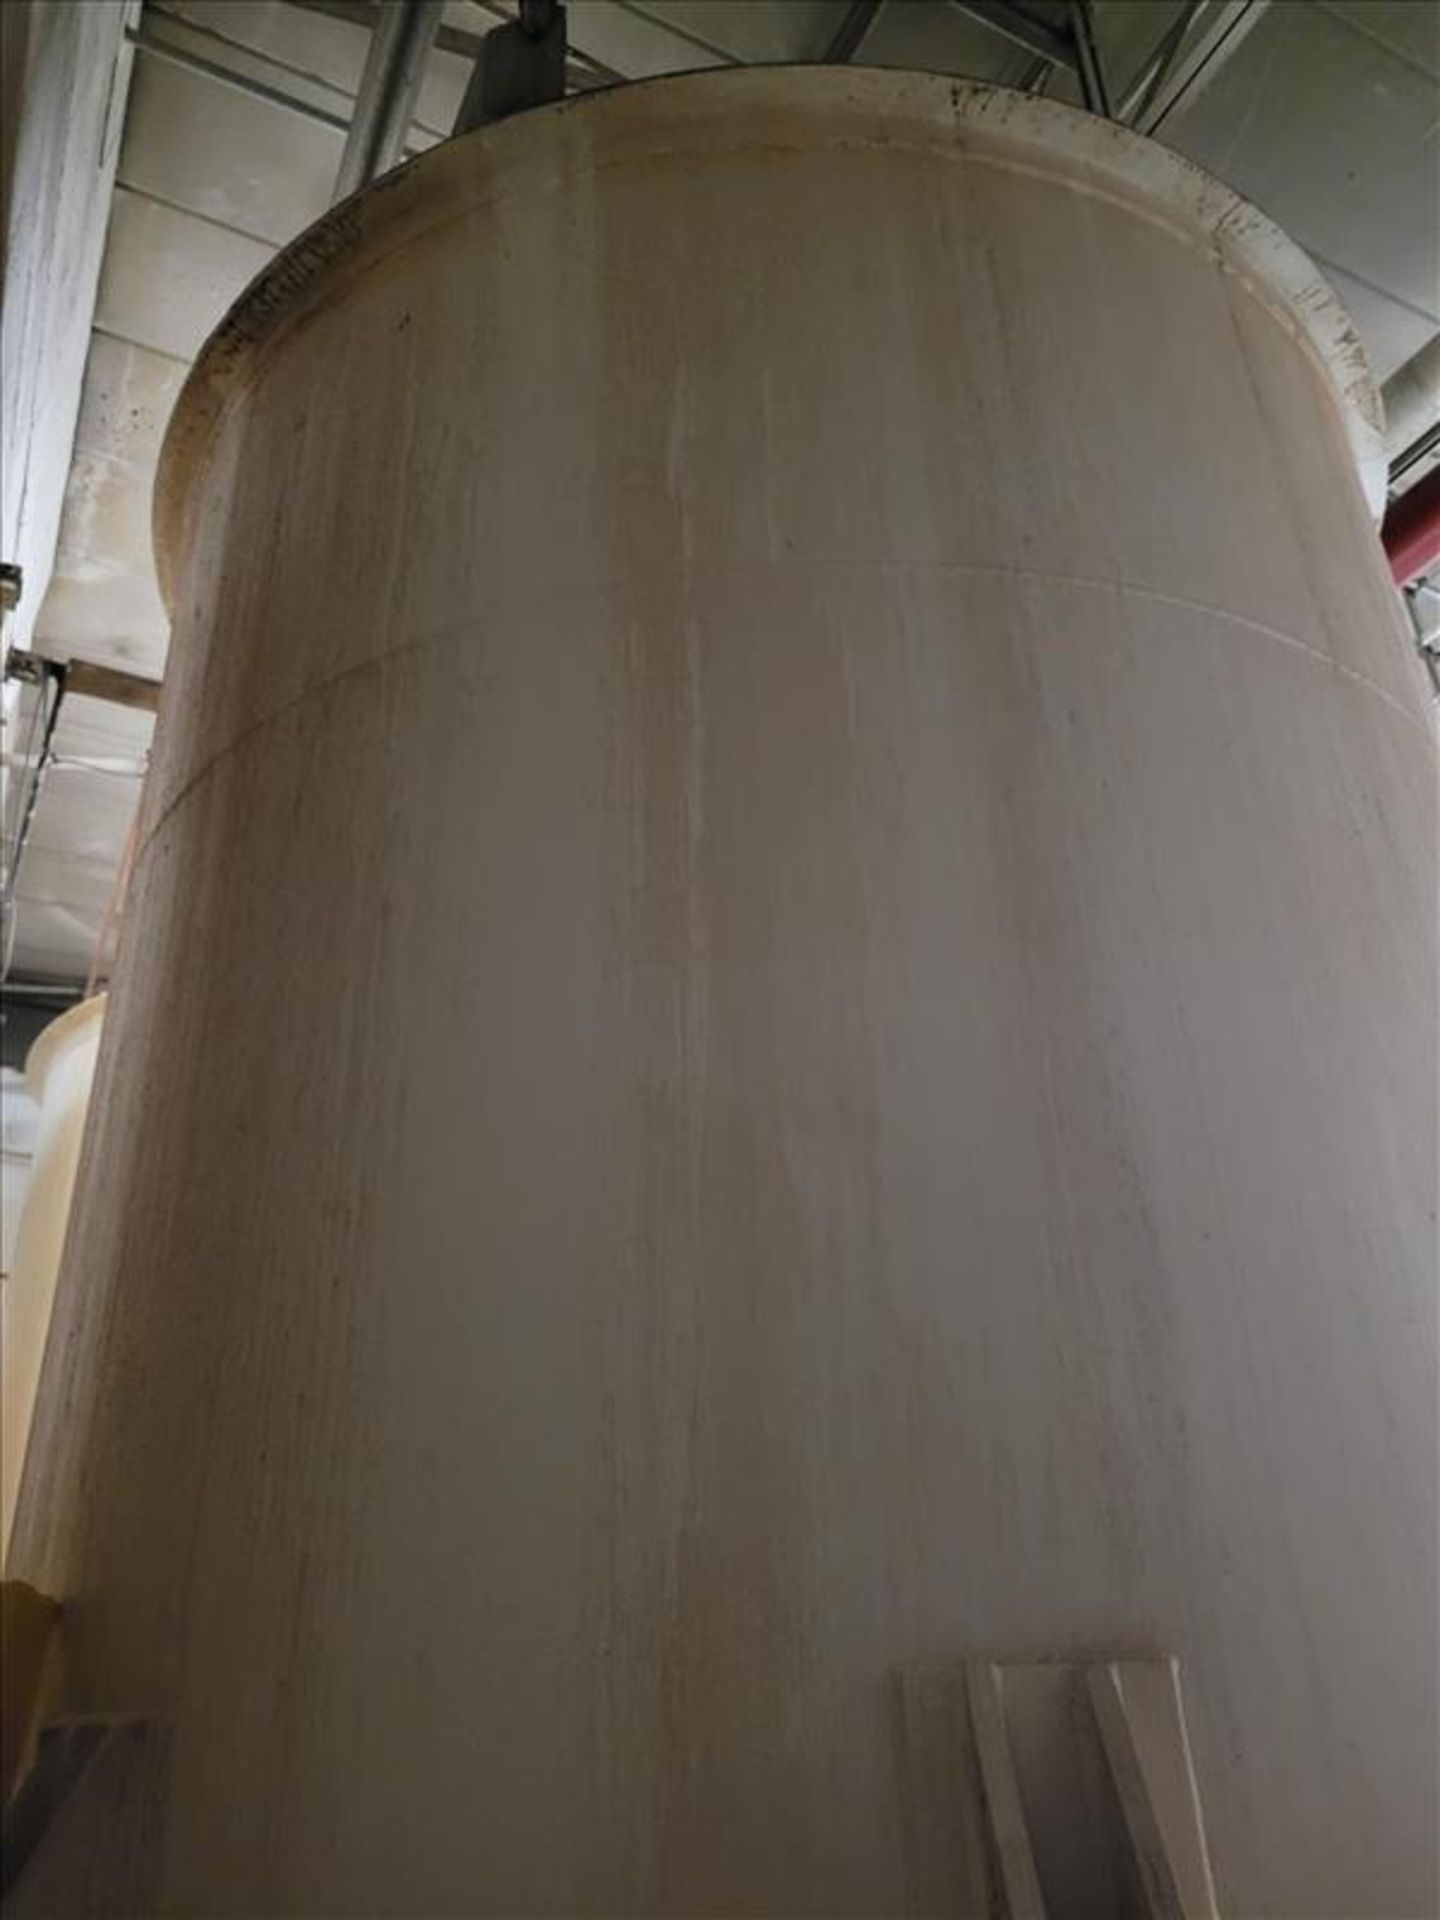 Approx. 3,500 Gal. Vertical Mild Steel Mix Tank, with Hot Water Cone Bottom Jacket, with Vertical - Image 4 of 10